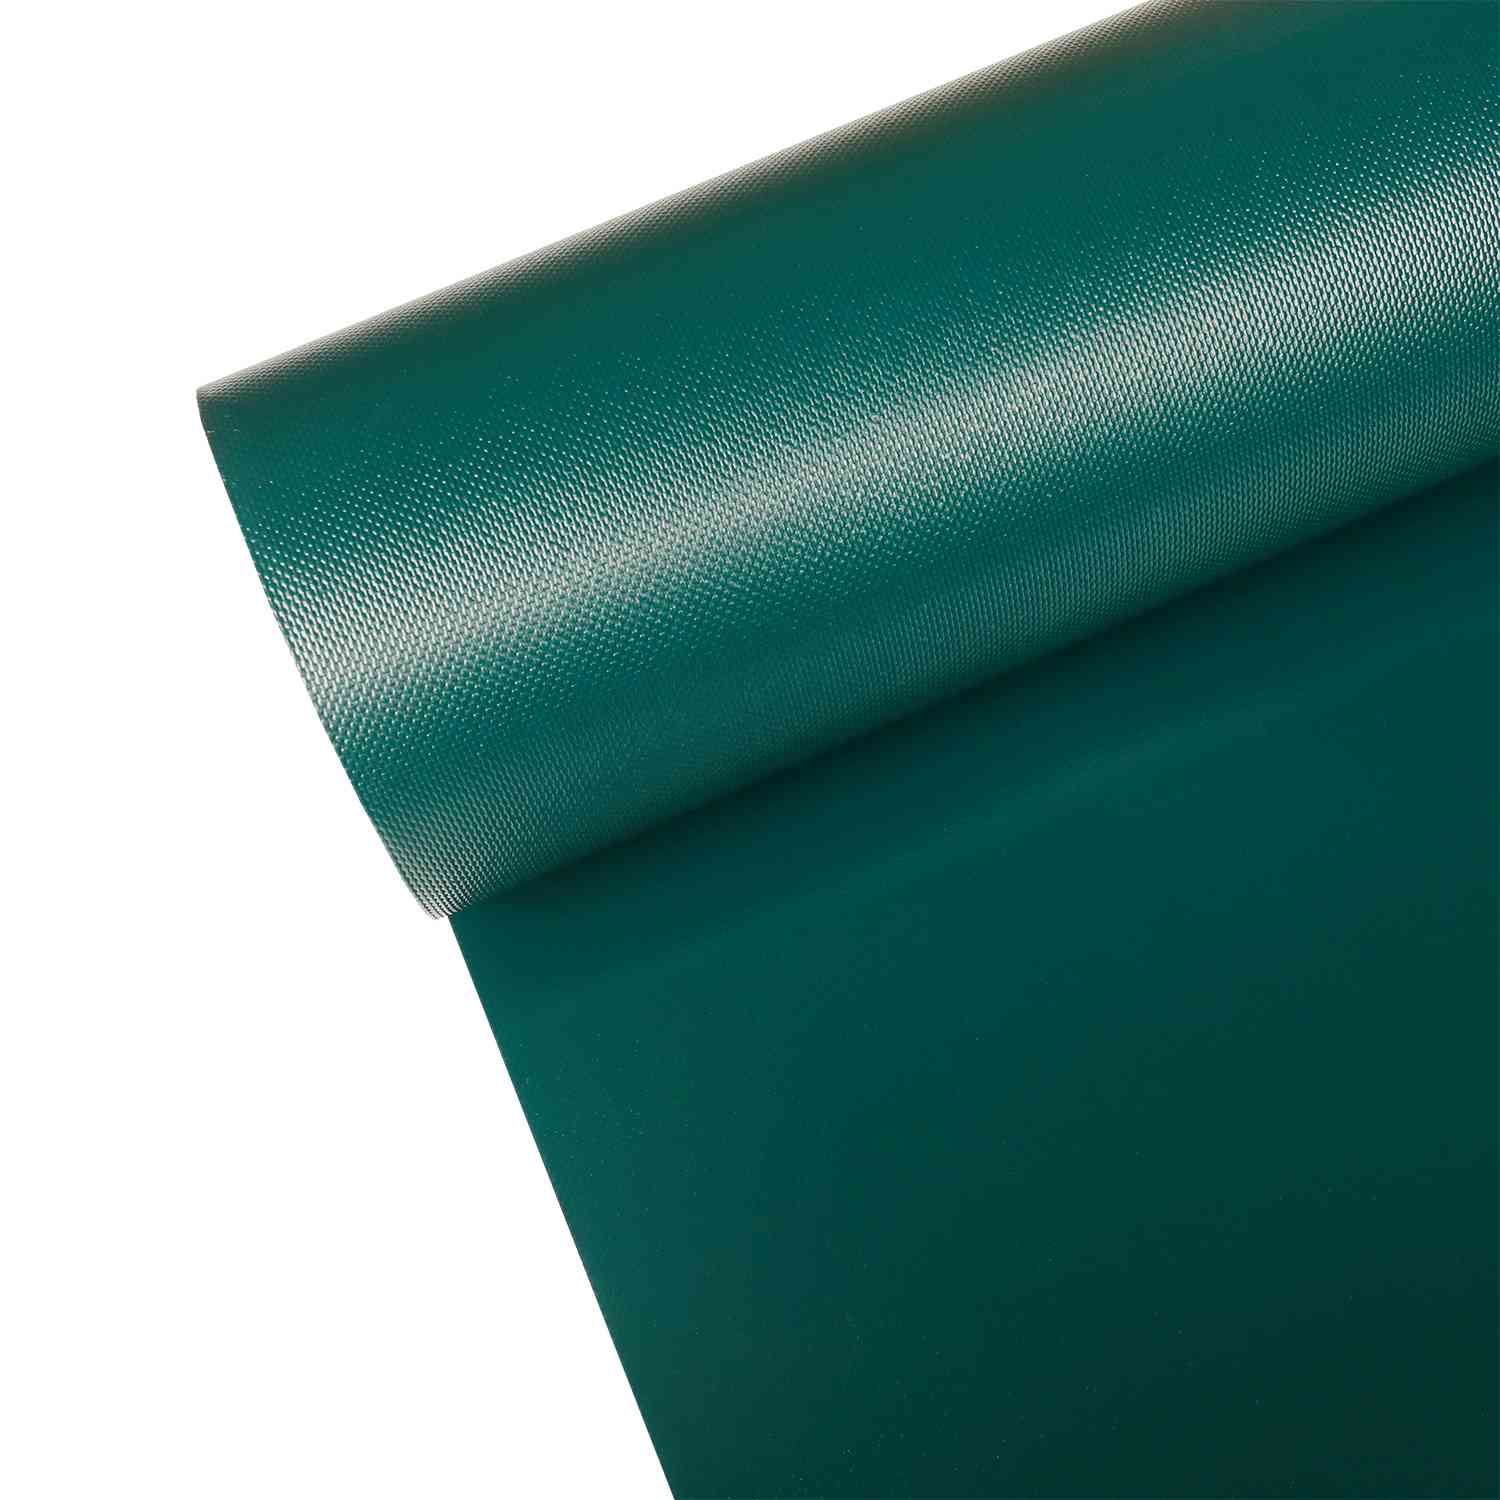 Premium 850gsm PVC Airtight Tarpaulin – Ideal for Inflatable Boats & More